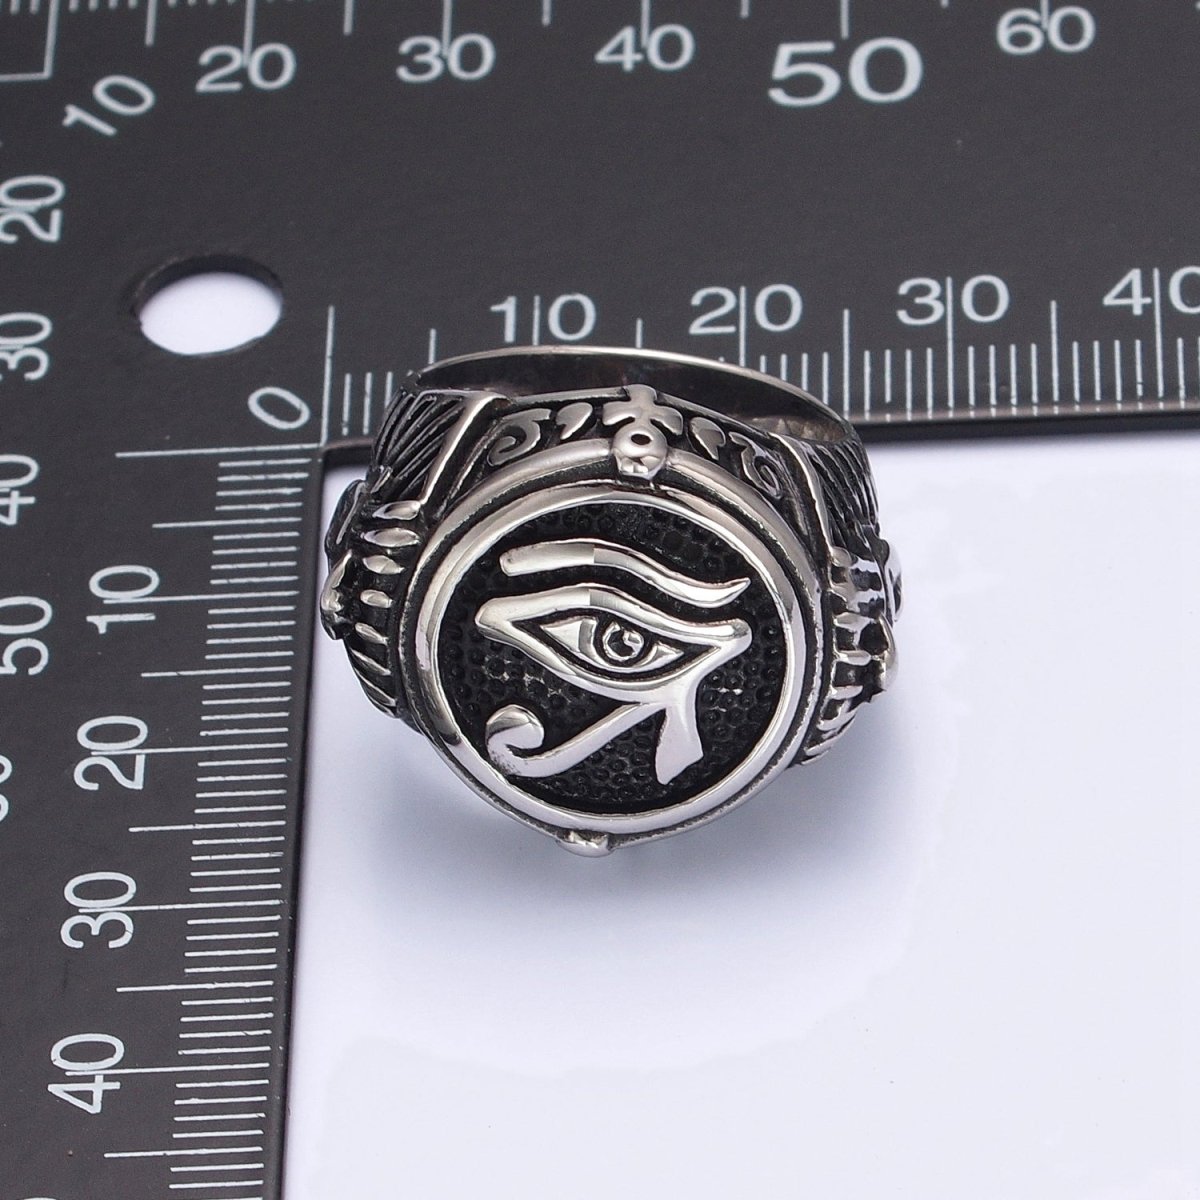 Men Stainless Steel Rings Eye Of Ra Silver Egyptian Eye of Horus Cross of Life Ankh Hieroglyphics Text Symbol Vintage Jewelry O-842 O-843 - DLUXCA